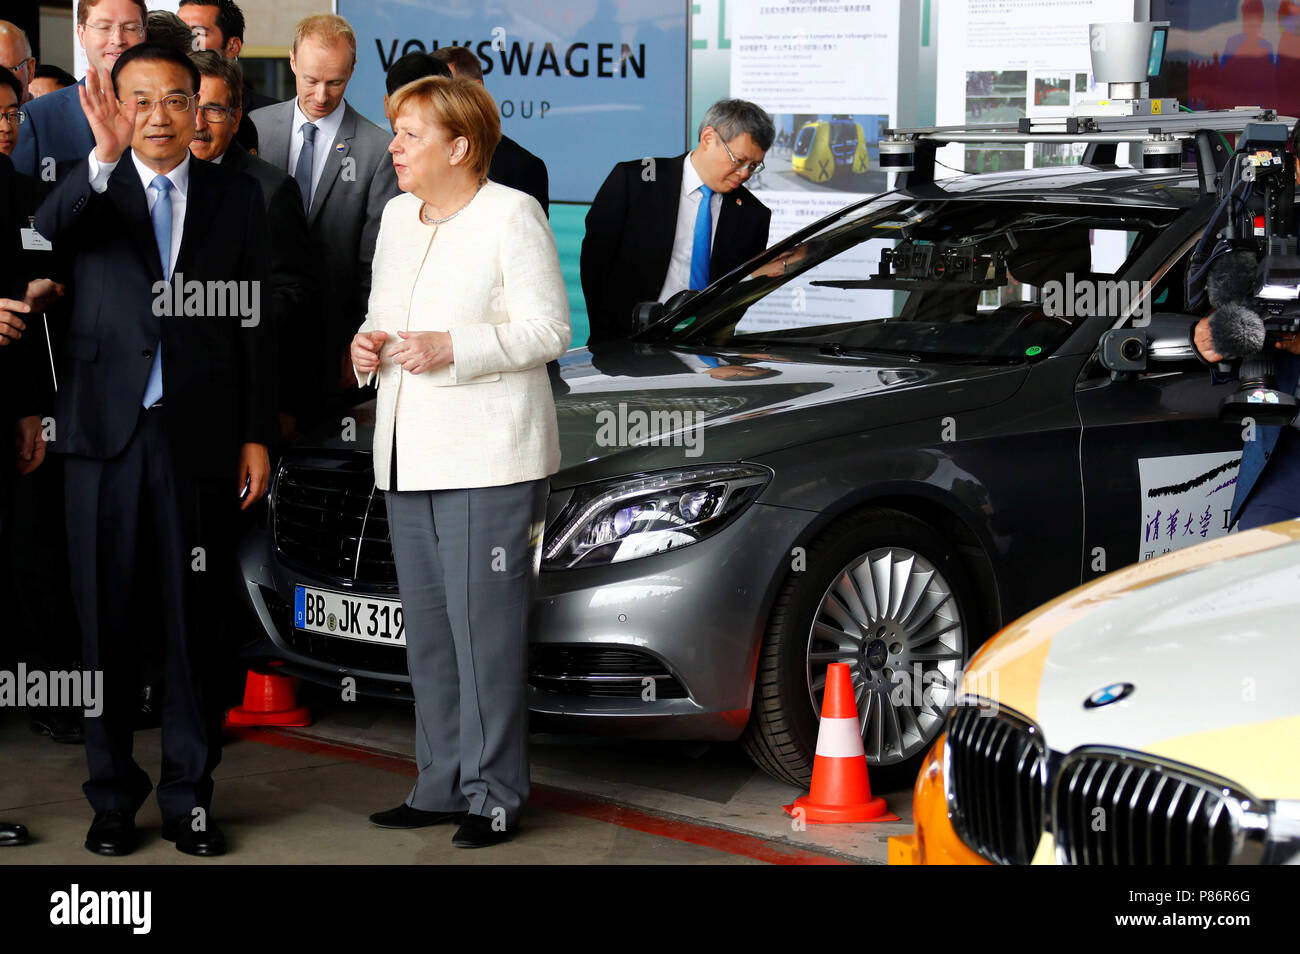 Berlin, Germany. 10th July, 2018. Chinese Premier Li Keqiang (L) and German Chancellor Angela Merkel of the Christian Democratic Union (CDU) attend a presentation for autonomous driving at Tempelhof airport in Berlin. A Mercedes Benz S-Class VRU stands next to them as a test vehicle. The visit takes place in the course of the 5th German-Chinese government consultations. Credit: Fabrizio Bensch/REUTERS POOL/dpa/Alamy Live News Stock Photo